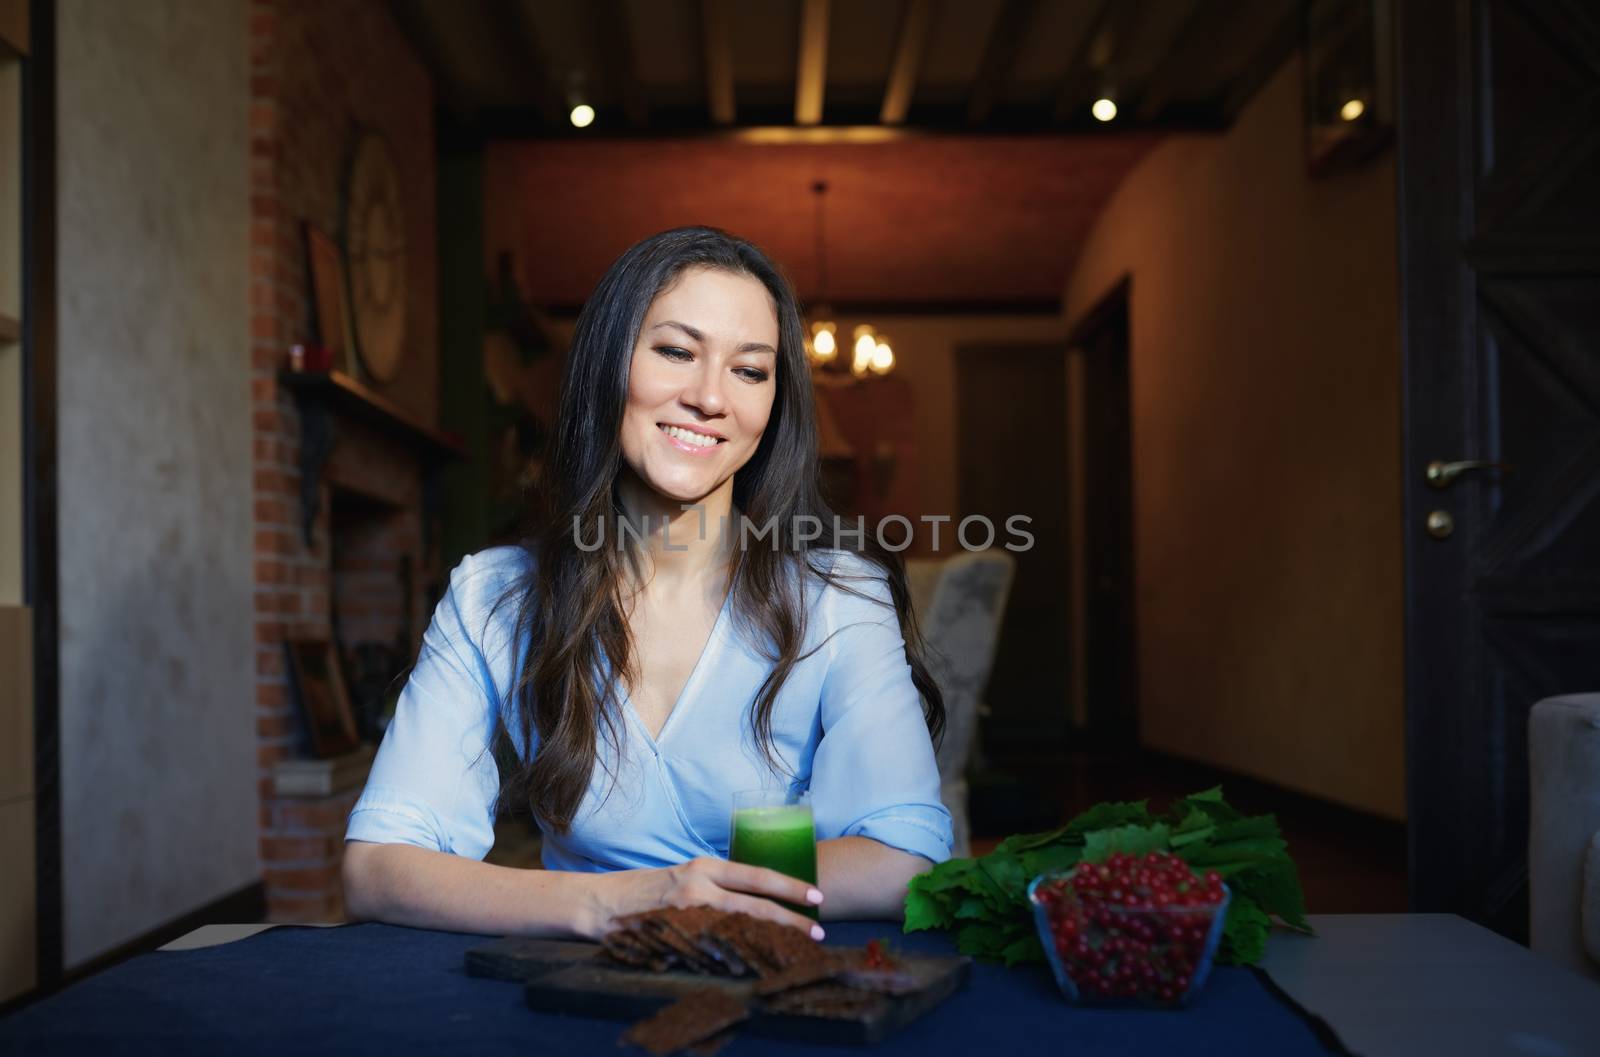 Smiling vegetarian woman sitting at the table with celery fresh  by Novic